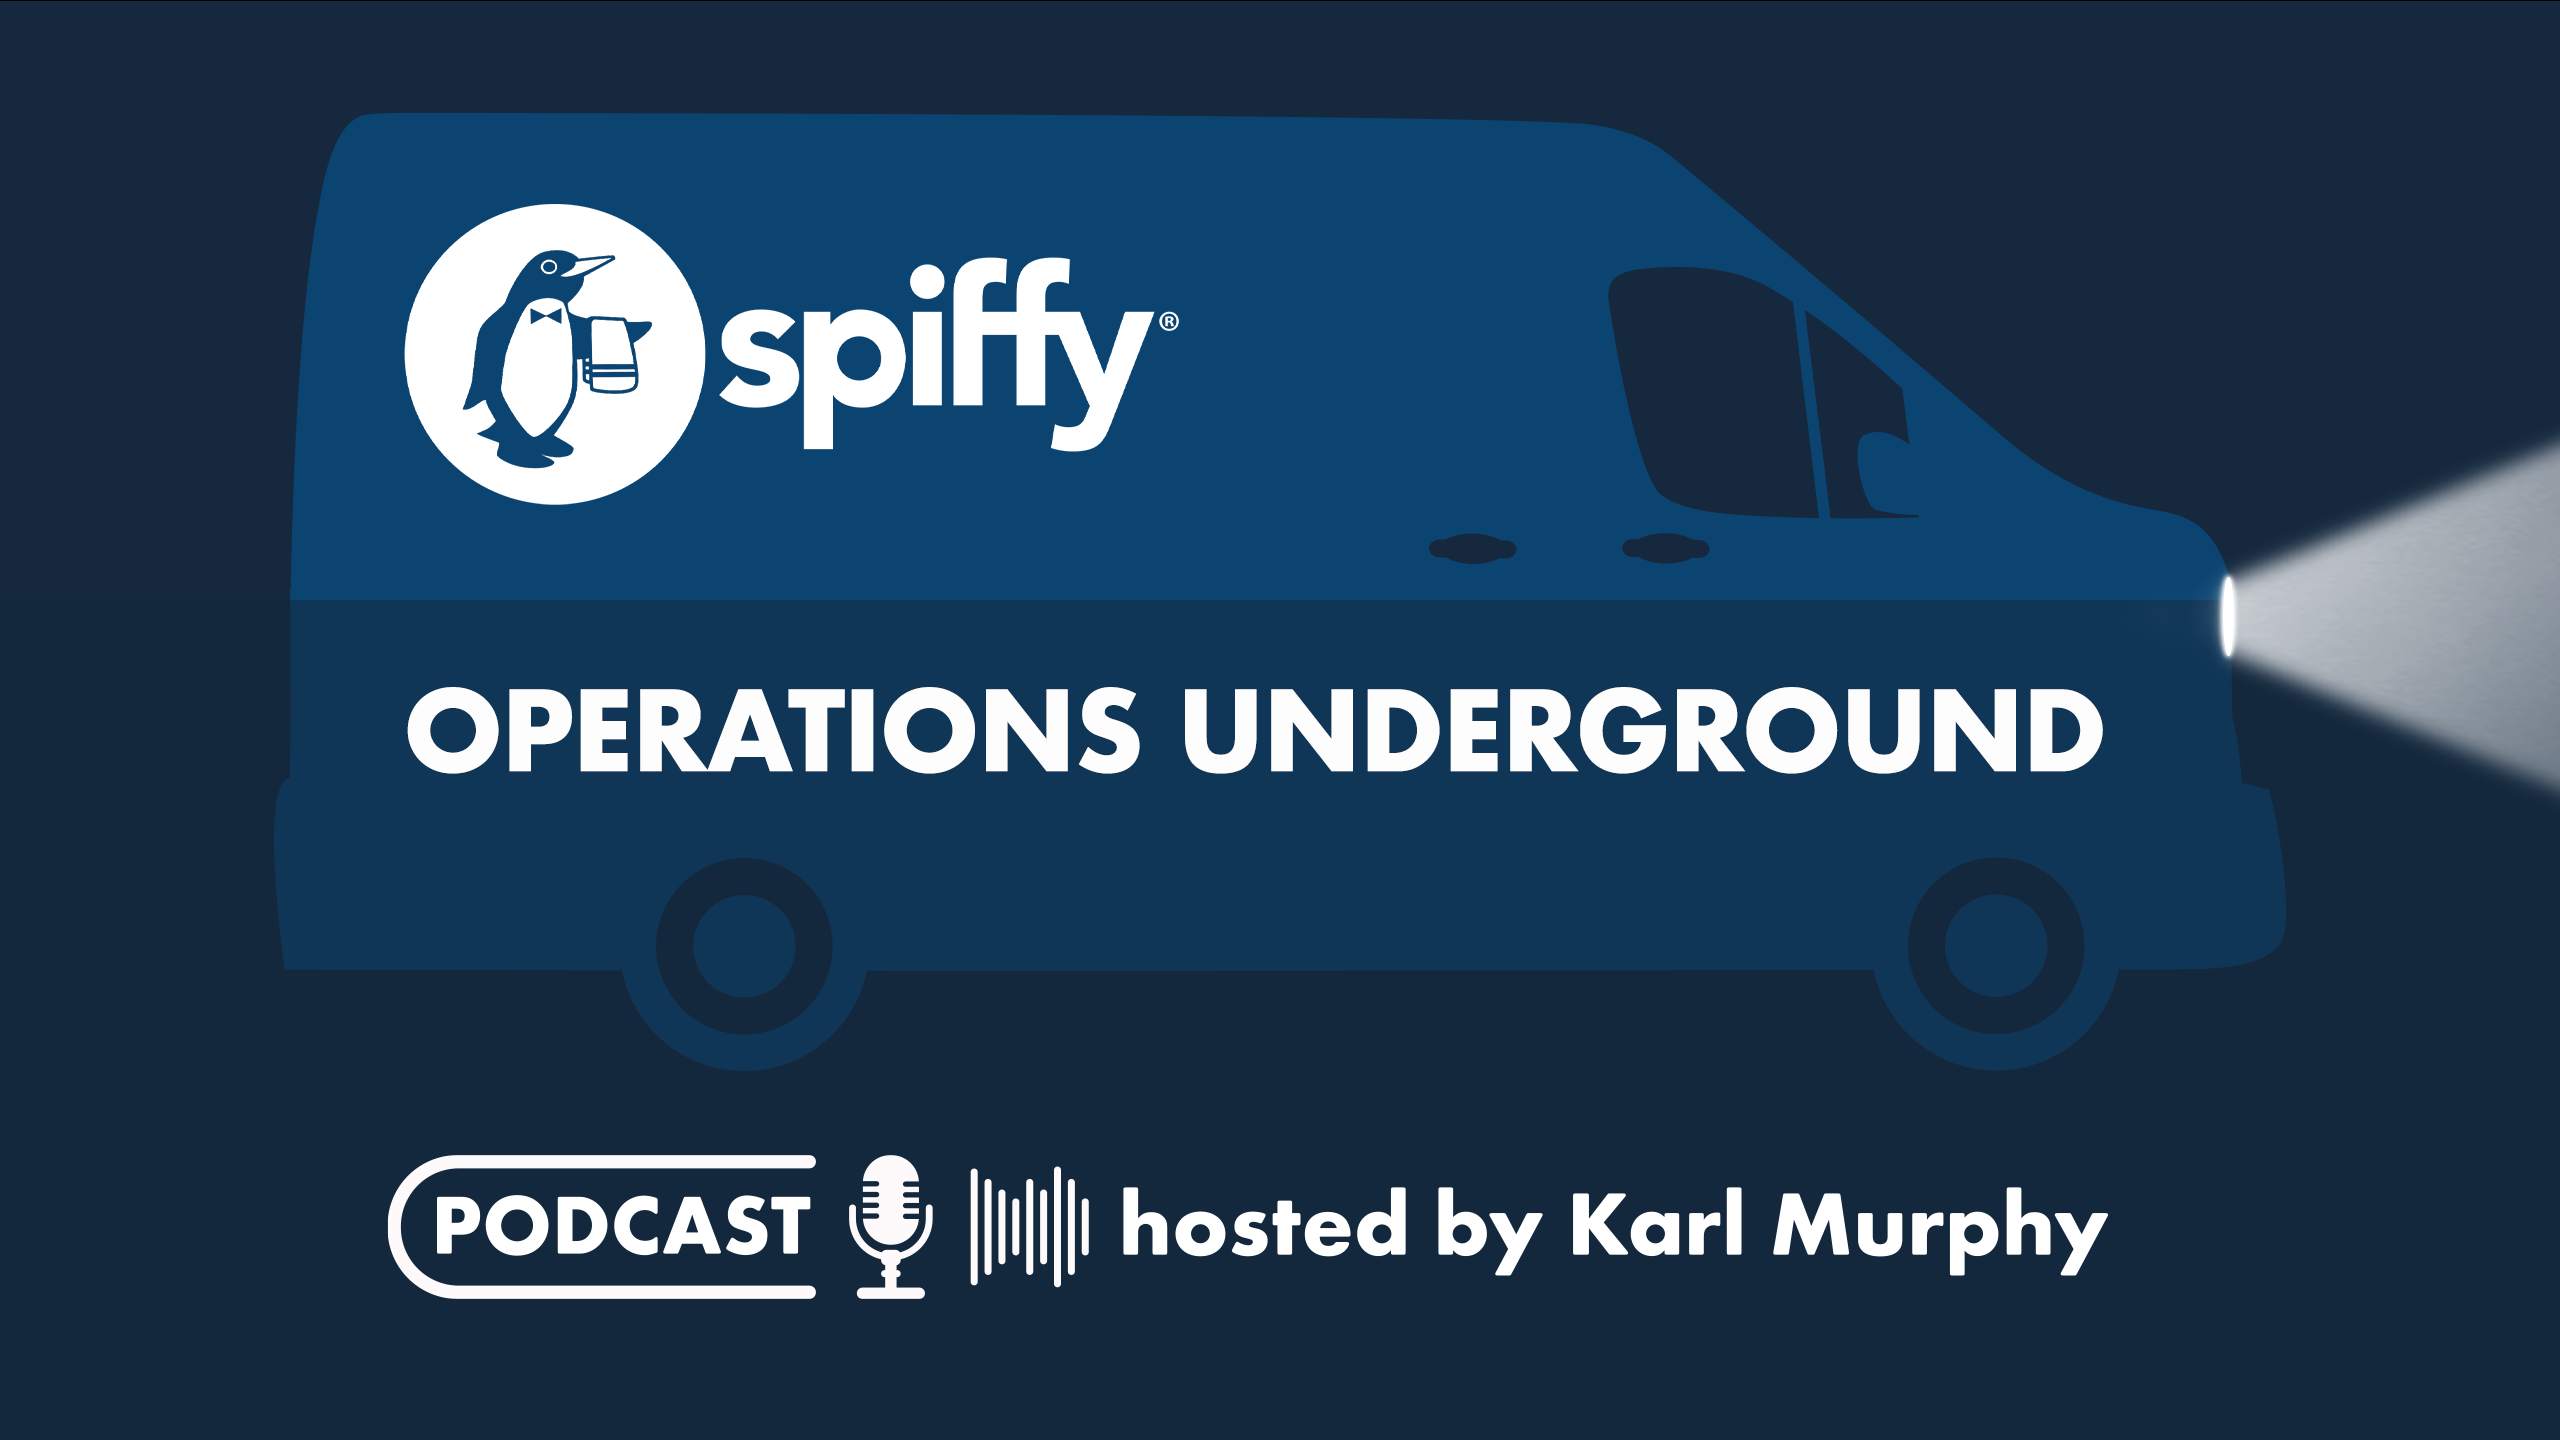 Spiffy-Operations-Underground-Podcast-Cover-Art